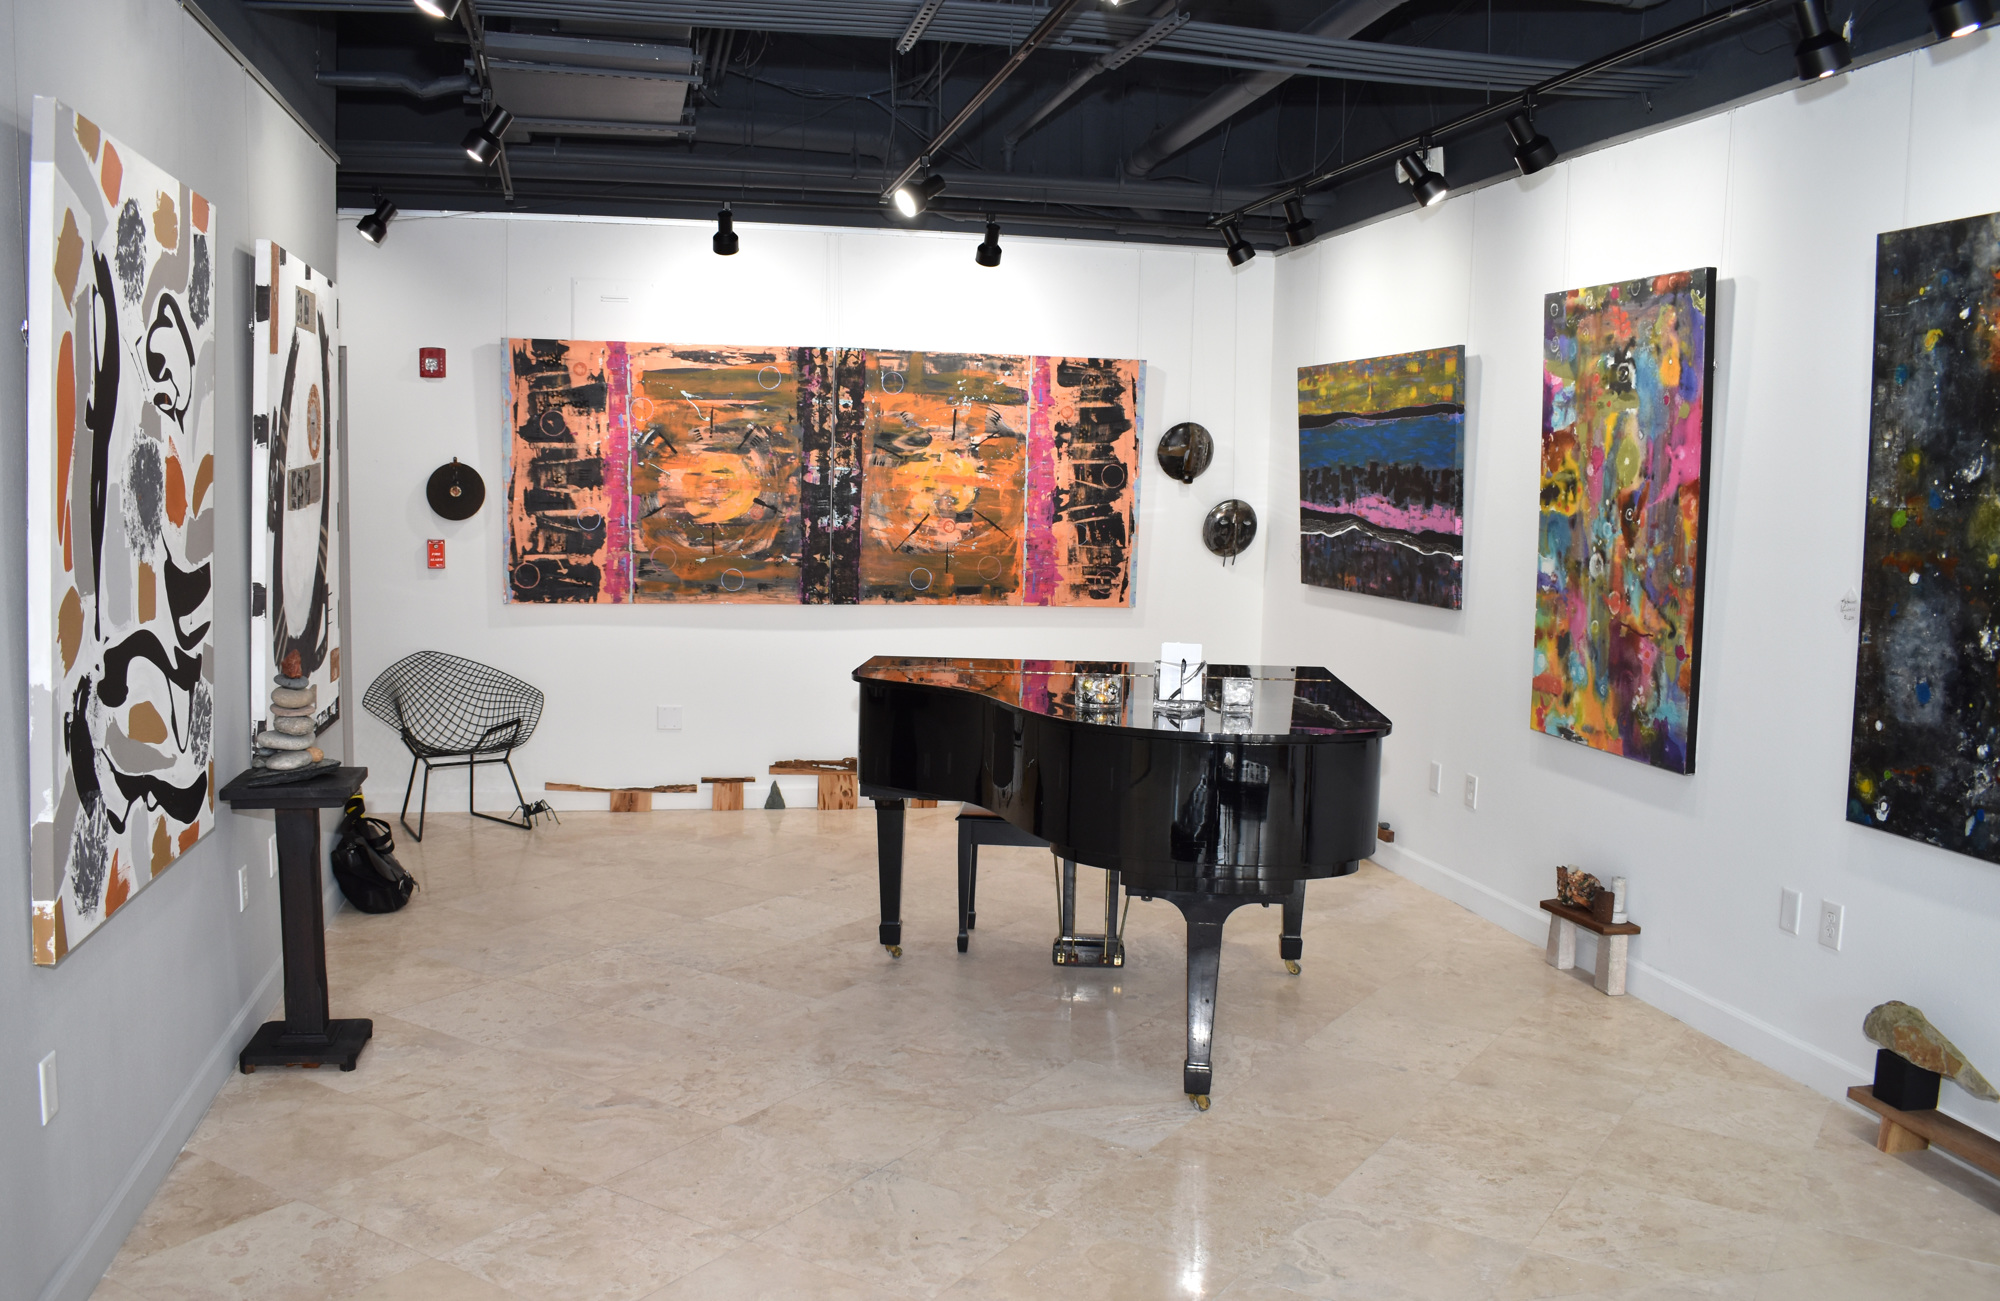 Grace Howl Contemporary Art and Gallery offers both a studio space and this adjoining gallery space, which Howl completes with a unique centerpiece — her grand piano. Photo by Niki Kottmann